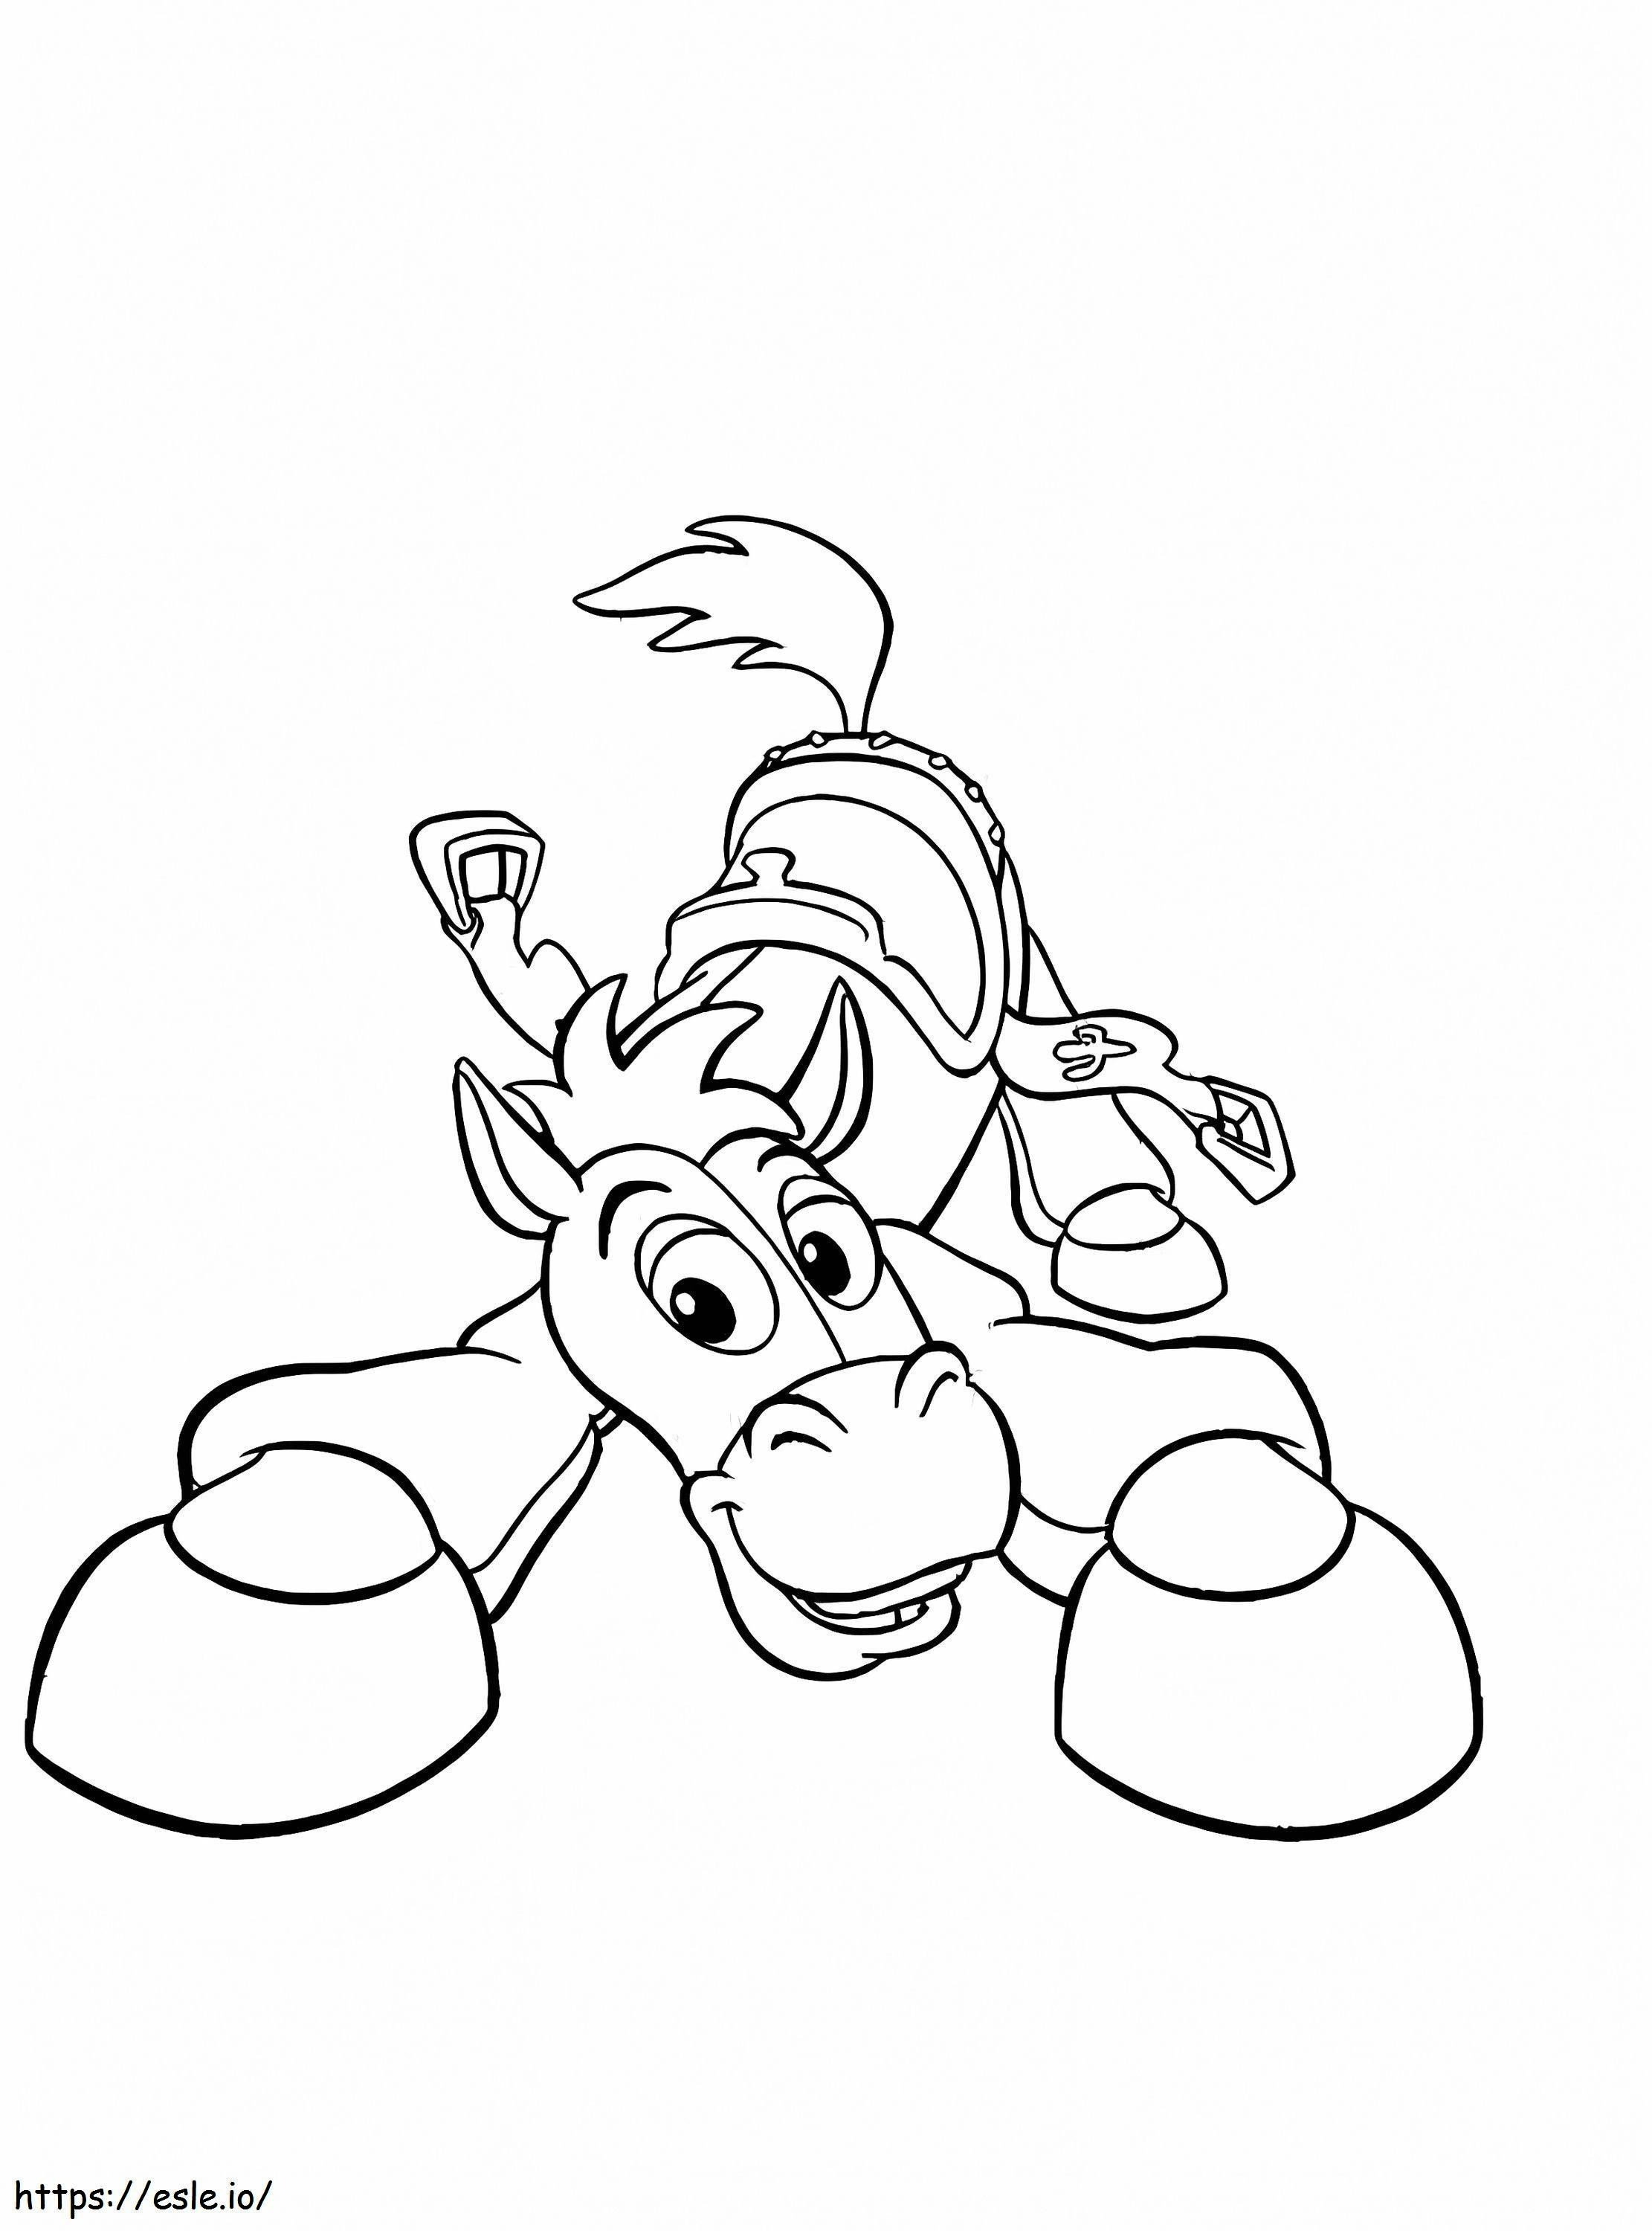 Meet Bullseye The Horse coloring page